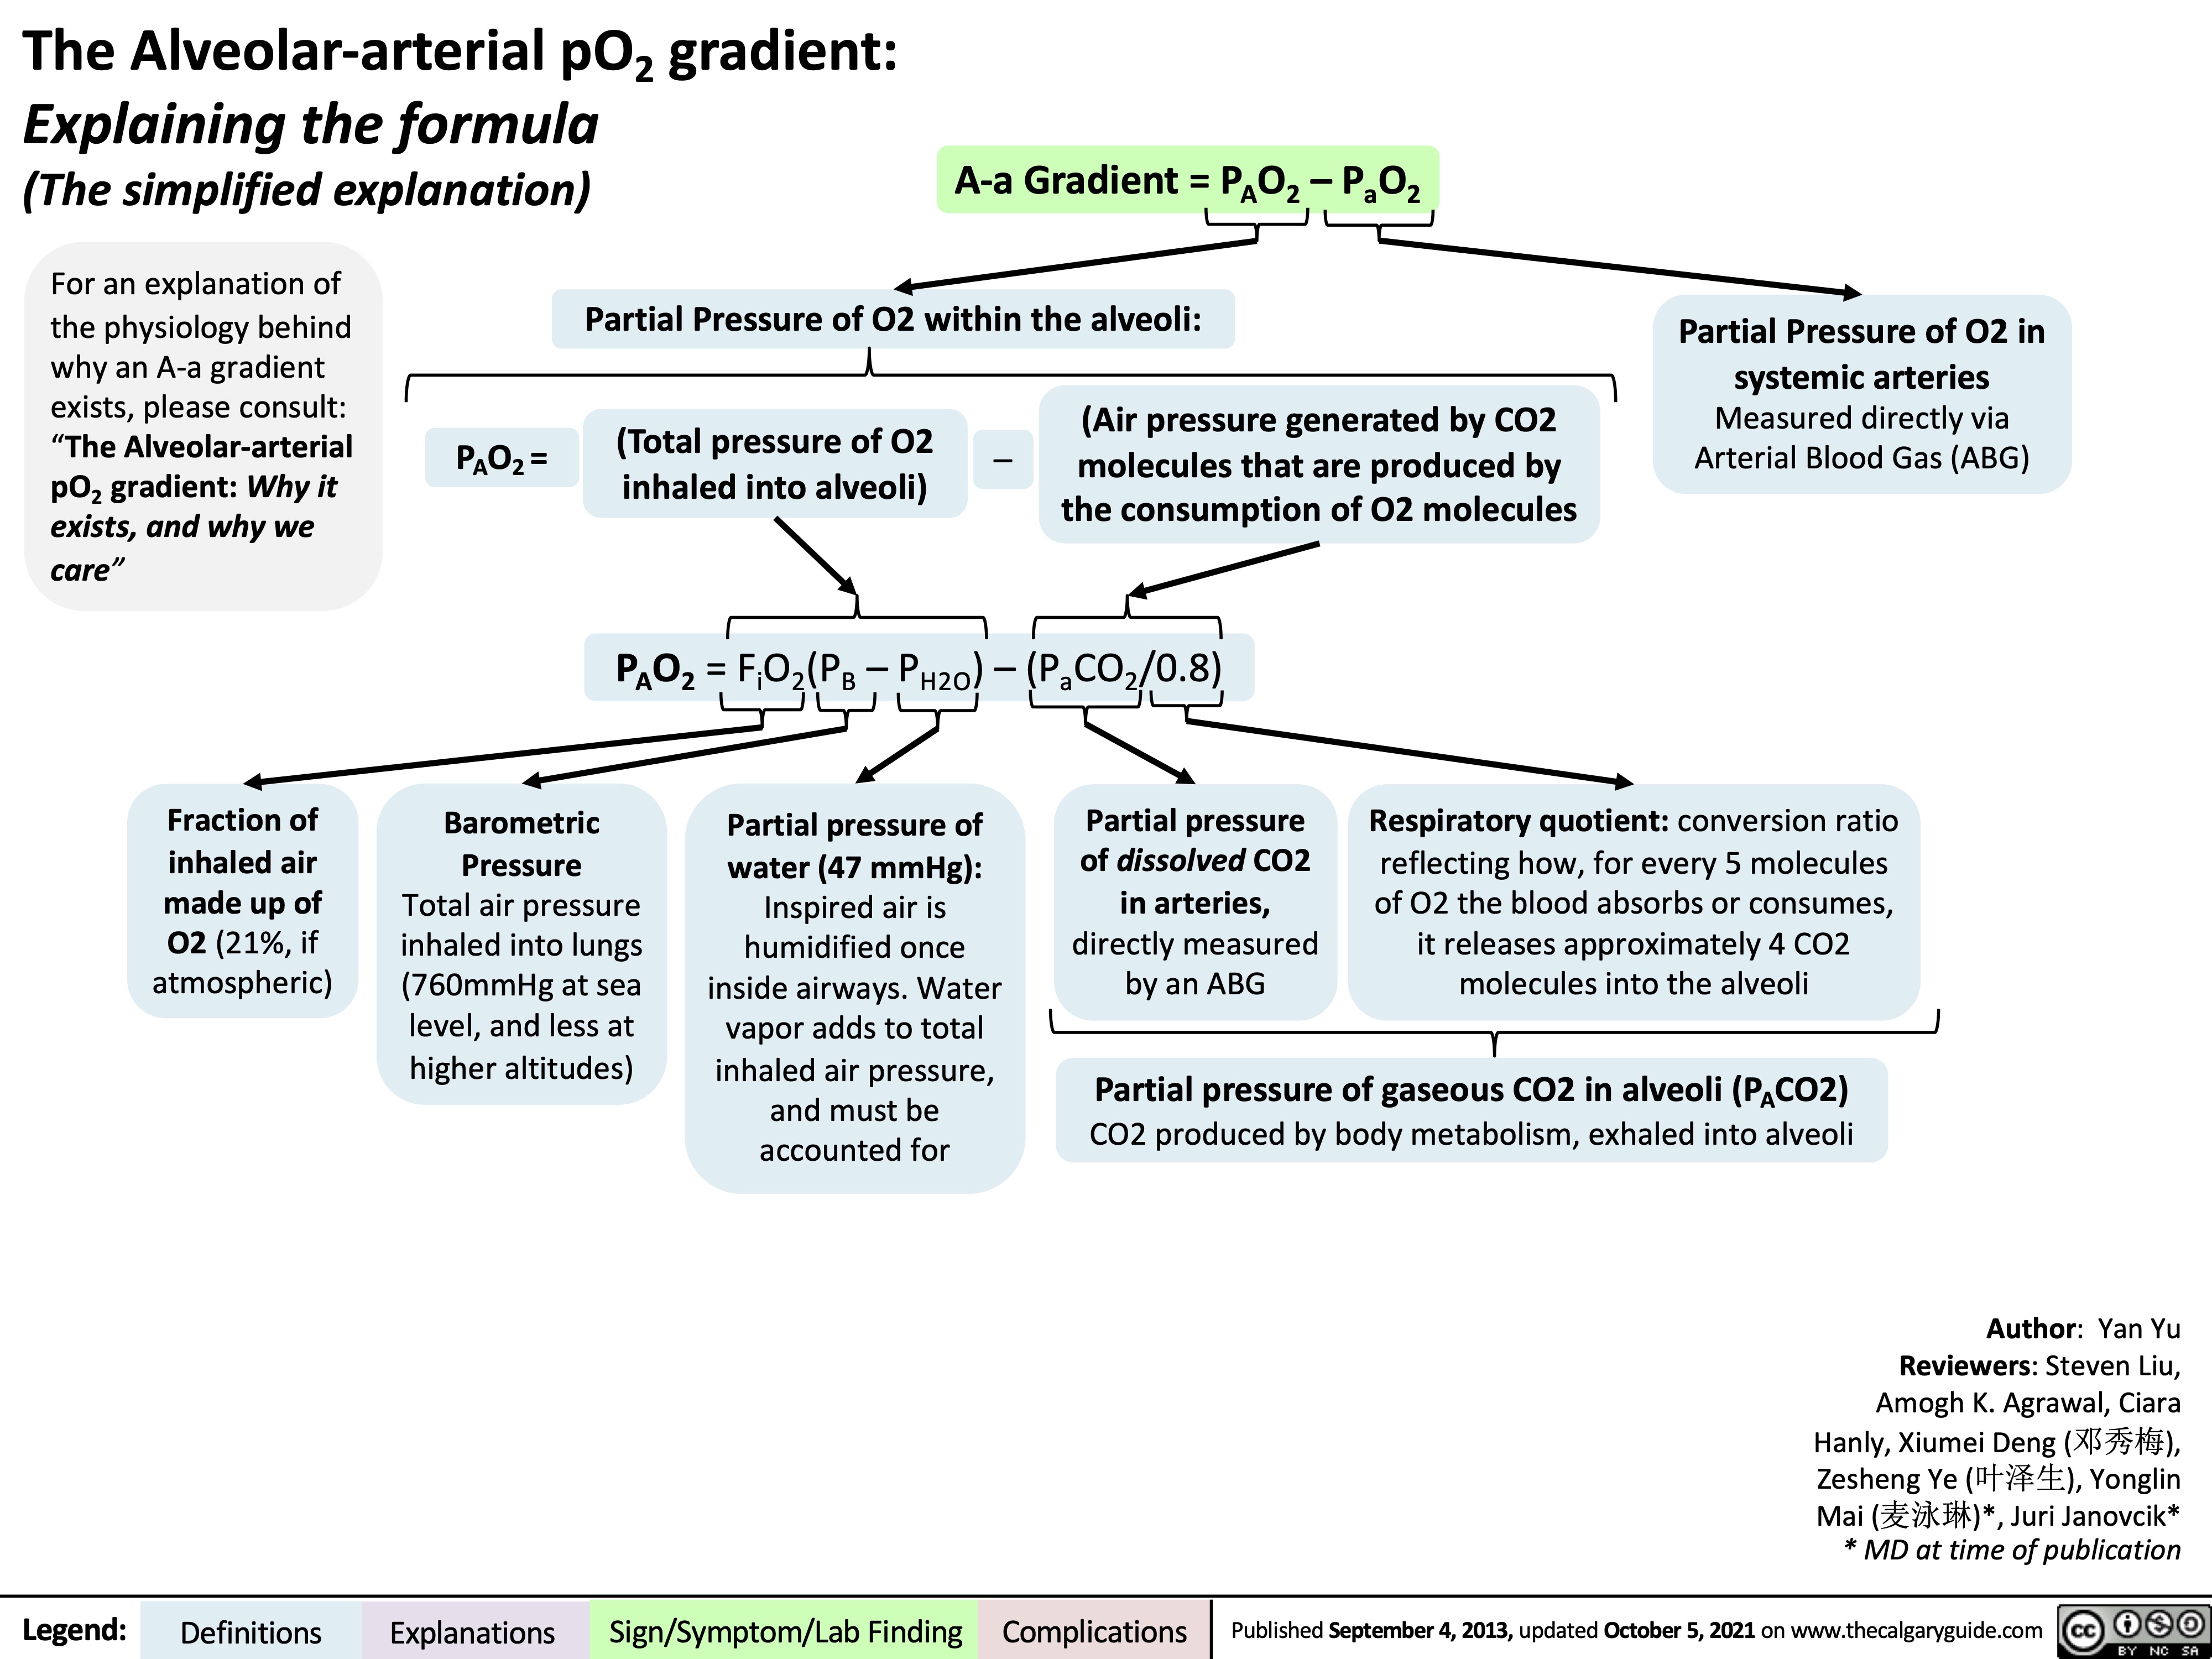 The Alveolar-arterial pO2 gradient:
Author: Yan Yu Reviewers: Steven Liu, Amogh K. Agrawal, Ciara Hanly, Xiumei Deng (邓秀梅), Zesheng Ye (叶泽生), Yonglin Mai (麦泳琳)*, Juri Janovcik* * MD at time of publication
Why it exists, and why we care
  Key Abbreviations:
• pO2: partial pressure of O2,
aka. “O2 content”.
• PaO2: partial pressure of O2 in
the arteries. Measured directly
via Arterial Blood Gas (ABGs). • PAO2: partial pressure of O2 in
the Alveoli. (Can’t be measured directly, must be calculated).
Theoretically, in lung capillaries adjacent to alveoli: O2
should diffuse from alveoli into lung capillaries, and no O2 should be lost from the blood until the blood reaches the systemic arteries – so the PaO2 should equal PAO2.
But in reality...
    Blood in the lung capillaries are not fully oxygenated to begin with:
Since gravity causes more blood to settle to the lung bases, there is too much blood there for it all to be fully oxygenated by the alveoli.
Less well-oxygenated blood from lung bases reduces the blood’s overall pO2
Less oxygenated blood from systemic veins are mixed into oxygenated blood from the lungs (“Venous admixture”):
    Venous drainage from the bronchial artery directly mixes with the pulmonary veins (oxygenated blood)
Some veins in the coronary circulation drain into the left ventricle, instead of into the coronary sinus/R atrium
     Thus, O2 content of blood when it finally reaches the systemic arteries (PaO2) is less than the O2 content in the alveoli (PAO2)
PAO2 - PaO2 = the pO2 “gradient” between the alveoli and the systemic arteries
Note: Abnormally high A- a gradients indicate issues with gas diffusion between alveoli & the pulmonary capillaries.
     Note: some respiratory pathologies can present with a normal A-a gradient as well (see relevant slides)
Normal A-a Gradient: <15 mmHg
High A-a Gradient (>15 mmHg) is always a sign of pathology (see relevant slides)
   Legend:
 Definitions
Explanations
Sign/Symptom/Lab Finding
 Complications
 Published September 4, 2013, updated October 5, 2021 on www.thecalgaryguide.com
   
The Alveolar-arterial pO2 gradient: Explainingtheformula A-aGradient=PO –PO
 (The simplified explanation)
A 2
a
2
   For an explanation of the physiology behind
why an A-a gradient exists, please consult: “The Alveolar-arterial pO2 gradient: Why it exists, and why we care”
Fraction of inhaled air made up of O2 (21%, if atmospheric)
Partial Pressure of O2 within the alveoli:
Partial Pressure of O2 in systemic arteries Measured directly via Arterial Blood Gas (ABG)
      PAO2 =
(Total pressure of O2 inhaled into alveoli)
(Air pressure generated by CO2 – molecules that are produced by
the consumption of O2 molecules
   PAO2 = FiO2(PB – PH2O) – (PaCO2/0.8)
        Barometric Pressure Total air pressure inhaled into lungs (760mmHg at sea level, and less at higher altitudes)
Partial pressure of water (47 mmHg): Inspired air is humidified once inside airways. Water vapor adds to total inhaled air pressure, and must be accounted for
Partial pressure of dissolved CO2 in arteries, directly measured by an ABG
Respiratory quotient: conversion ratio reflecting how, for every 5 molecules of O2 the blood absorbs or consumes, it releases approximately 4 CO2 molecules into the alveoli
  Partial pressure of gaseous CO2 in alveoli (PACO2)
CO2 produced by body metabolism, exhaled into alveoli
Author: Yan Yu Reviewers: Steven Liu, Amogh K. Agrawal, Ciara Hanly, Xiumei Deng (邓秀梅), Zesheng Ye (叶泽生), Yonglin Mai (麦泳琳)*, Juri Janovcik* * MD at time of publication
 Legend:
 Definitions
Explanations
Sign/Symptom/Lab Finding
 Complications
 Published September 4, 2013, updated October 5, 2021 on www.thecalgaryguide.com
   
The Alveolar-arterial pO2 gradient:
Explaining the formula
(The scientifically-correct explanation)
    For an explanation of the physiology behind
why an A-a gradient exists, please consult: “The Alveolar-arterial pO2 gradient: Why it exists, and why we care”
A-a Gradient = PAO2 – PaO2 Partial Pressure of O2 within the alveoli:
Partial Pressure of O2 in systemic arteries
Measured directly via Arterial Blood Gas (ABG)
Rationale: While O2 is being absorbed from the alveoli into the capillary, CO2 is being released from the capillary into the alveoli. Normal body metabolism is such that the amount of CO2 released is directly proportional to the amount of O2 absorbed.
      PAO2 =
(Total pO2 entering alveoli)
Can be calculated easily
– (total pO2 leaving alveoli and absorbed into blood)
Cannot be directly measured; need to estimate it using the level of CO2 in the alveoli, which we can measure
      PAO2 = FiO2(PB – PH2O) – (PaCO2/0.8)
        Fraction of inhaled air made up of O2 (21%, if atmospheric)
Barometric Pressure Total air pressure inhaled into lungs (760mmHg at sea level, and less at higher altitudes, ie: 660mmHg in Calgary)
47 mmHg: Inspired air is humidified once inside airways. Water vapor adds to total inhaled air pressure, and must be accounted for
Partial pressure of dissolved CO2 in arteries, directly measured by an ABG
Respiratory quotient (RQ): the ratio of the amount of CO2
released from the arterial blood to
the amount of O2 absorbed or
consumed by the blood. The value
of the RQ can vary depending
upon the diet consumed
 Note: The respiratory quotient (carbohydrates, fats, and proteins)
(RQ) is always <1 because
and the metabolic state. RQ is
around 0.82 for the average human diet.
Author: Yan Yu Reviewers: Steven Liu, Amogh K. Agrawal, Ciara Hanly, Xiumei Deng (邓秀梅), Zesheng Ye (叶泽生), Yonglin Mai (麦泳琳)*, Juri Janovcik* * MD at time of publication
 Legend:
 Definitions
Explanations
Sign/Symptom/Lab Finding
 Complications
 Published September 4, 2013, updated October 5, 2021 on www.thecalgaryguide.com
   